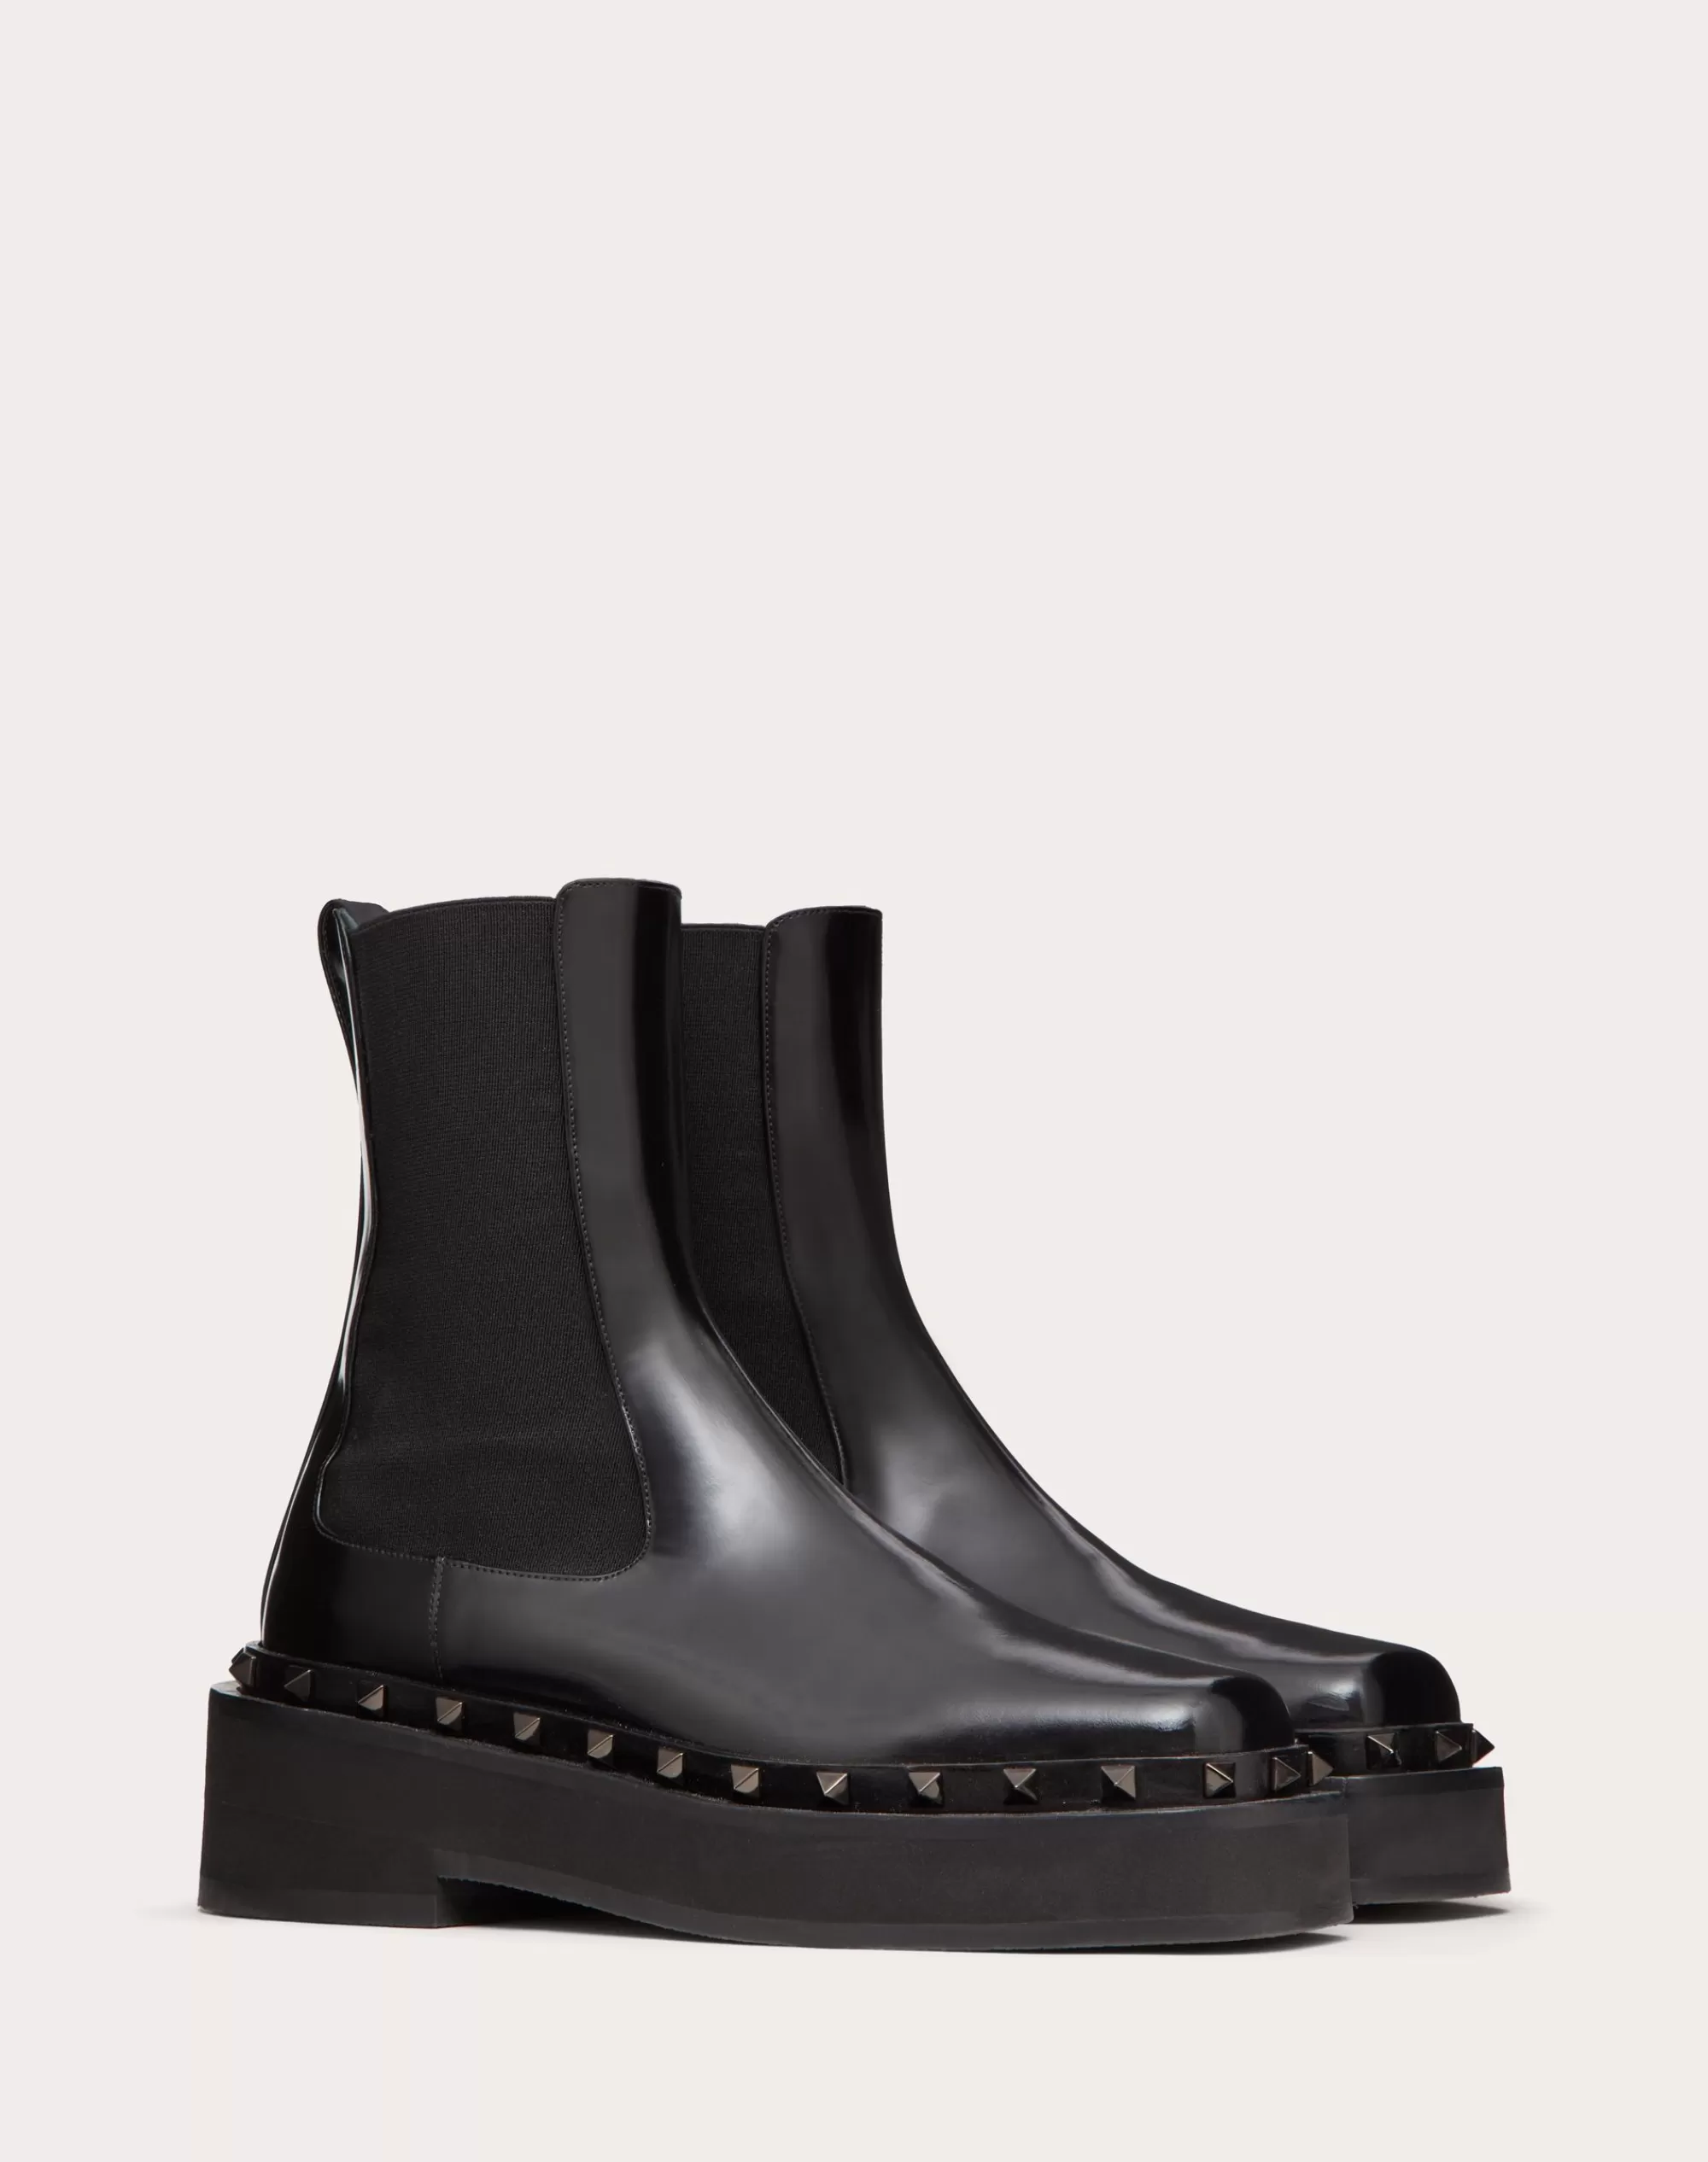 Valentino M-WAY ROCKSTUD BEATLE IN CALFSKIN WITH TONE-ON-TONE STUDS 50 MM Black Outlet